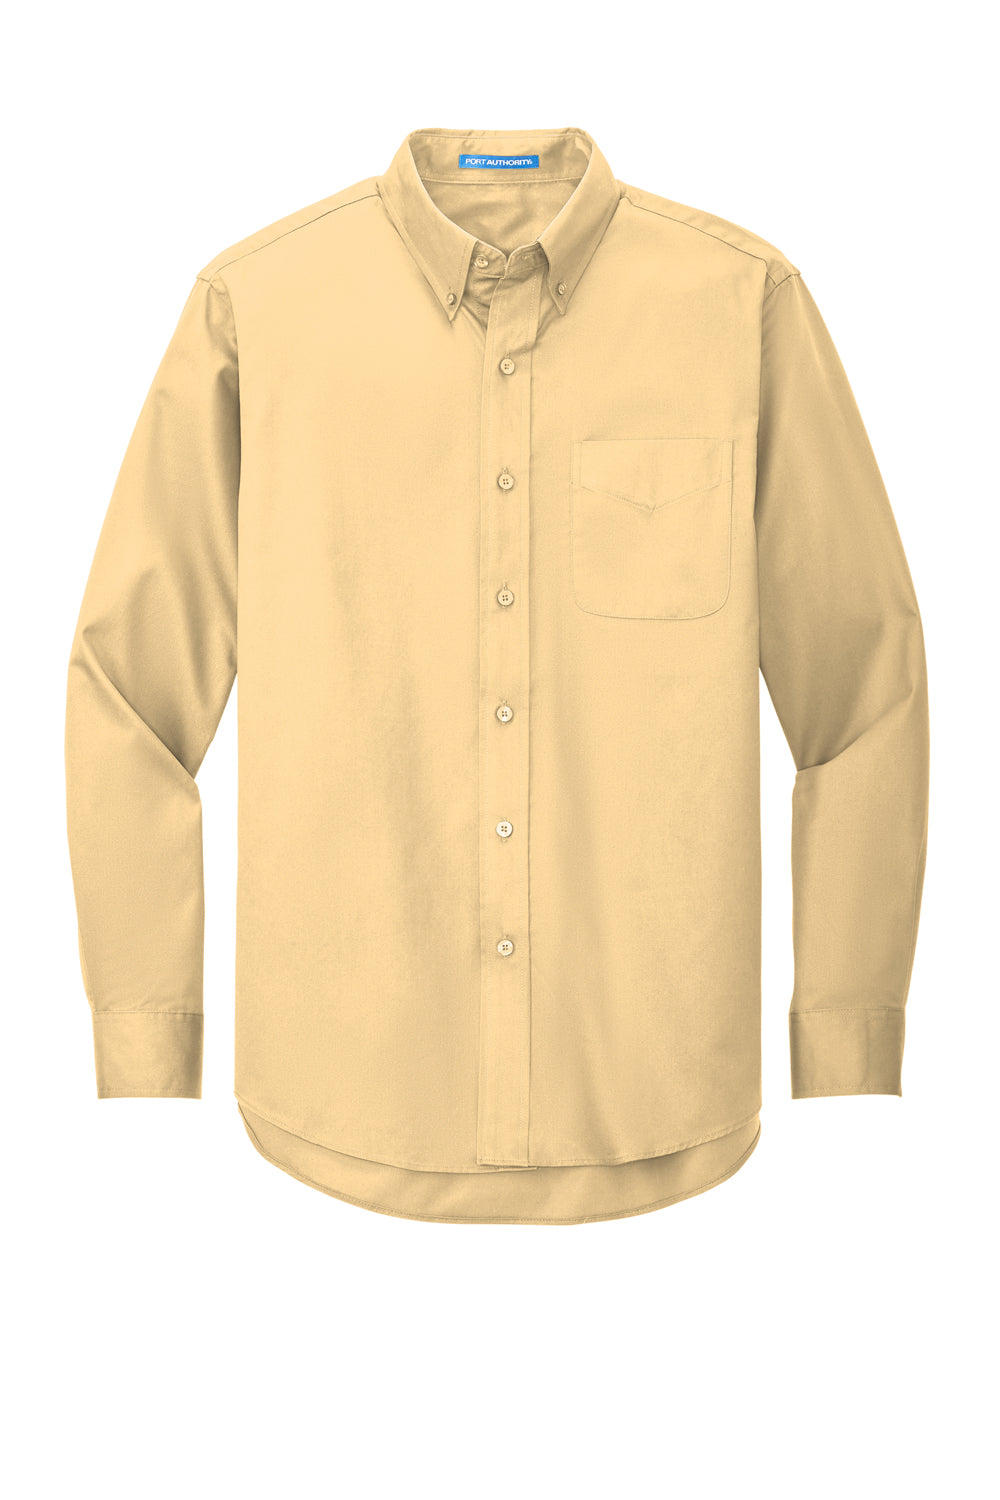 Port Authority S608/TLS608/S608ES Mens Easy Care Wrinkle Resistant Long Sleeve Button Down Shirt w/ Pocket Yellow Flat Front